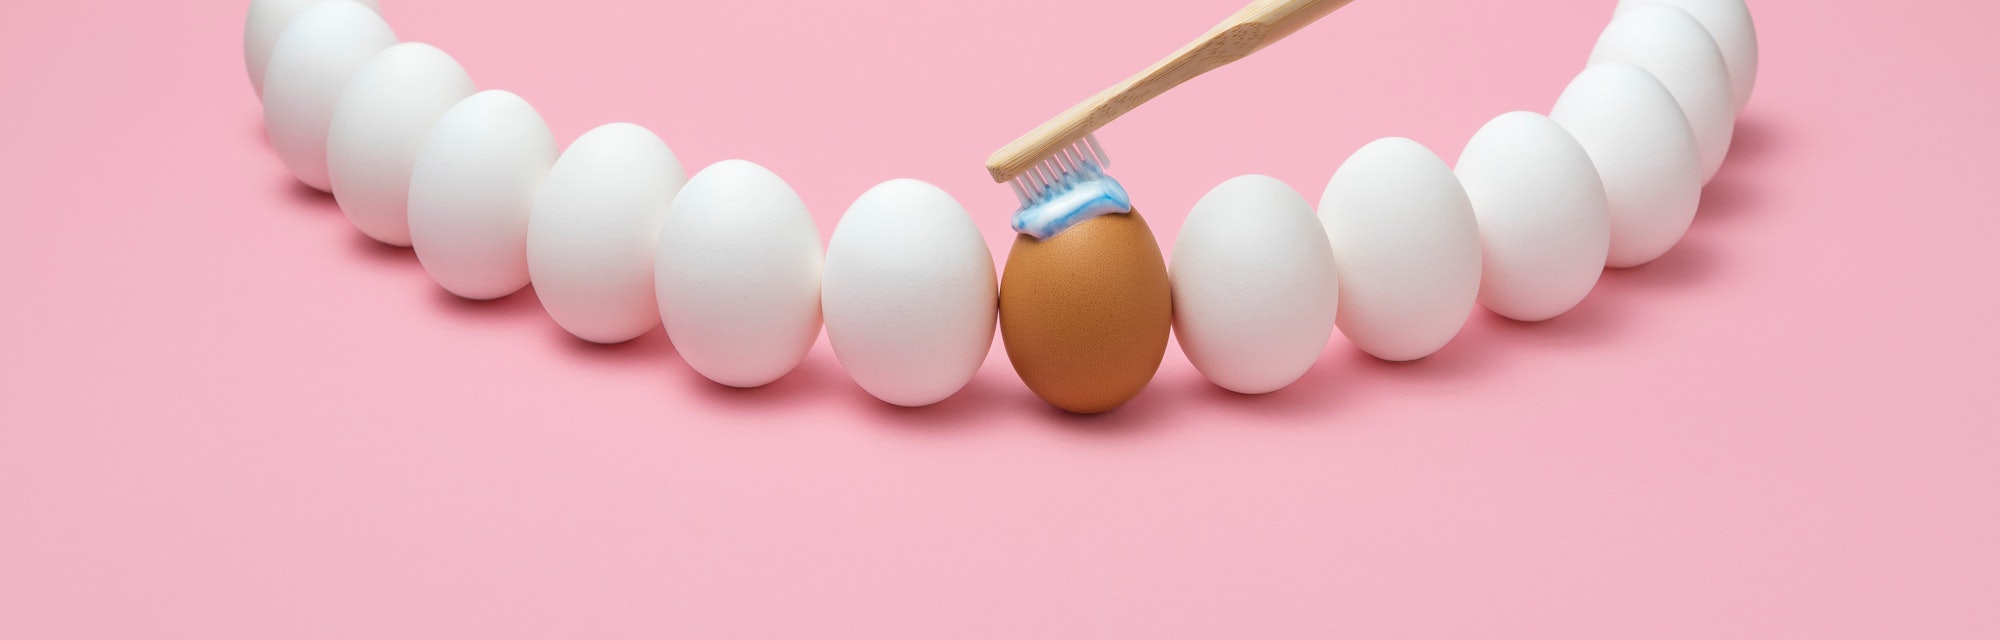 Concept for oral hygiene with a wooden toothbrush, toothpaste, and several eggs simulating the human...